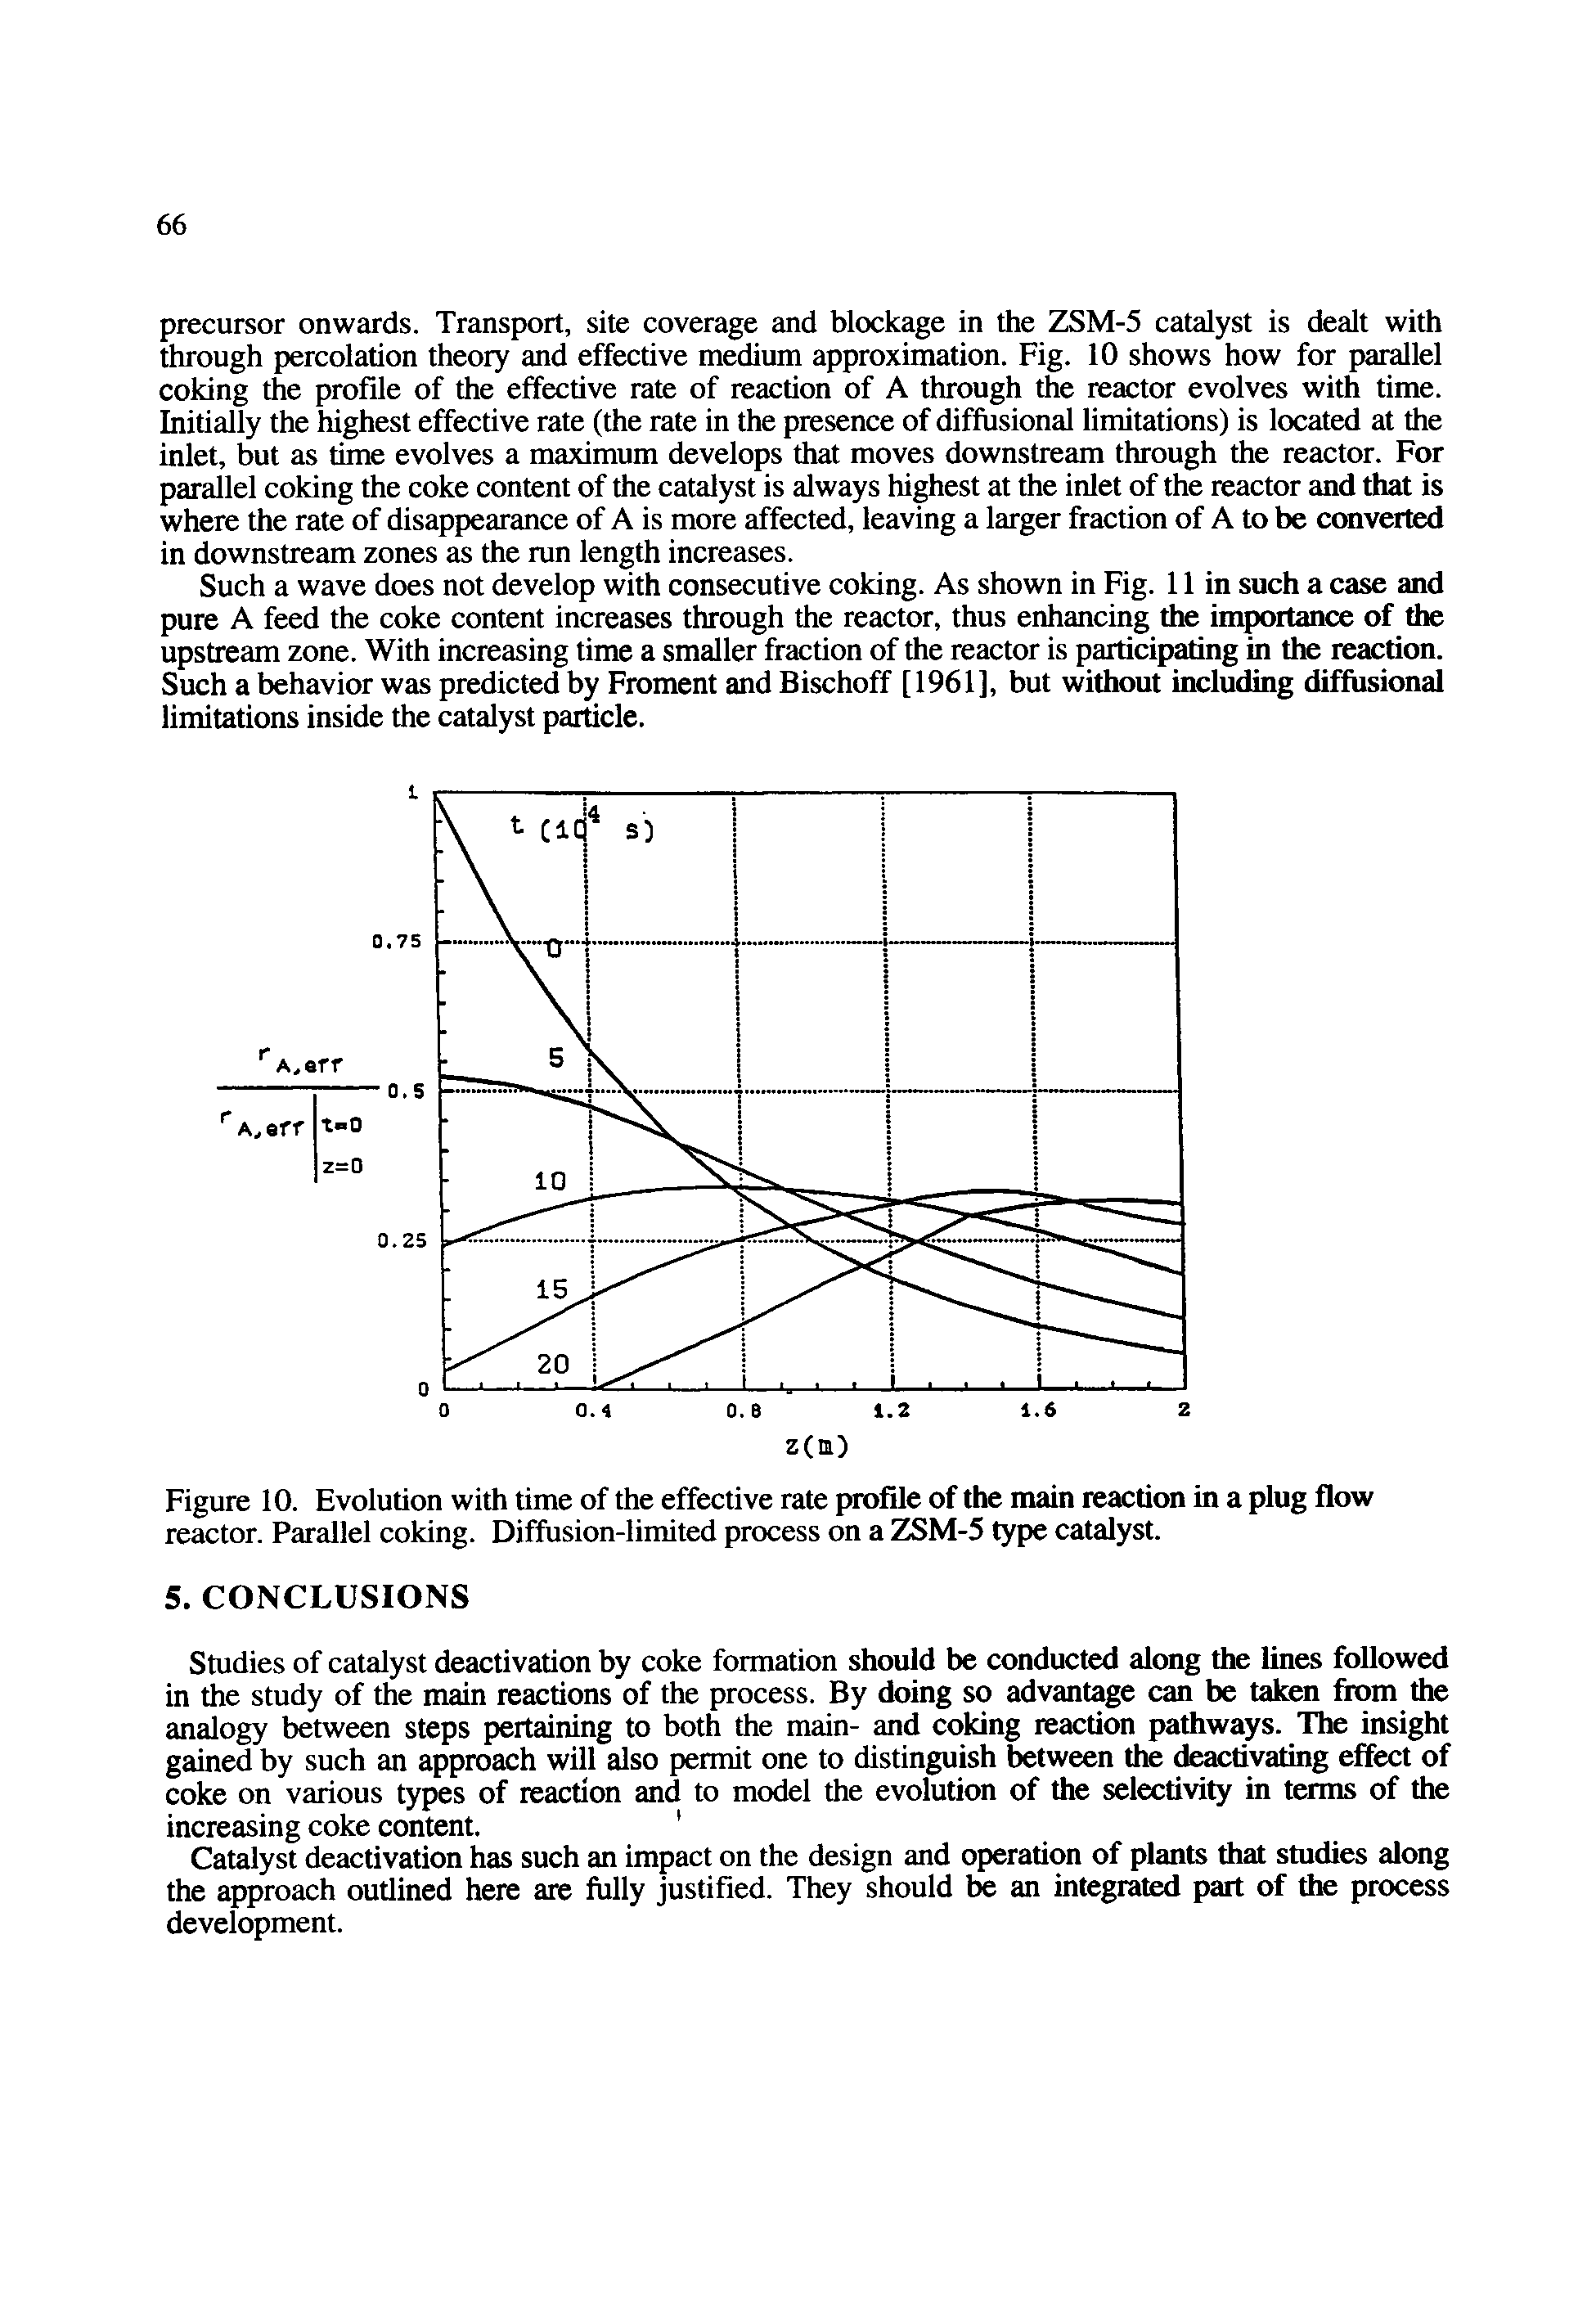 Figure 10. Evolution with time of the effective rate profile of the main reaction in a plug flow reactor. Parallel coking. Diffusion-limited process on a ZSM-5 type catalyst.